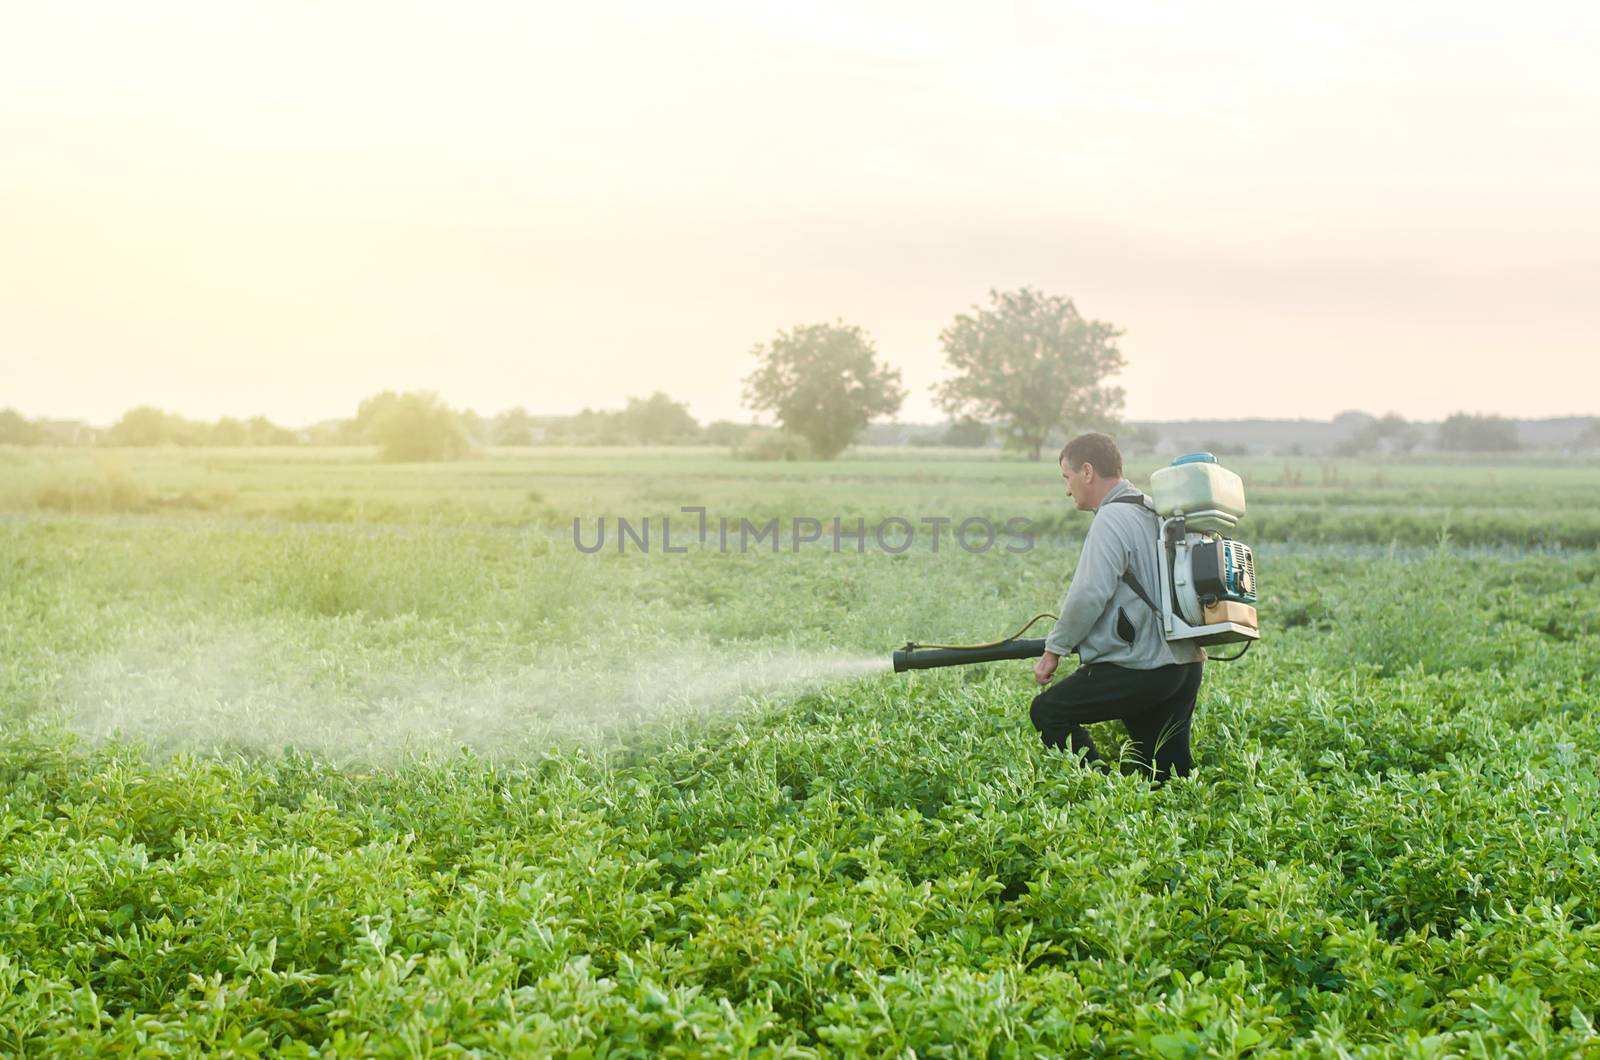 Farmer with a mist sprayer blower processes the potato plantation. Protection and care. Environmental damage and chemical pollution. Use of industrial chemicals to protect crops from insects and fungi by iLixe48